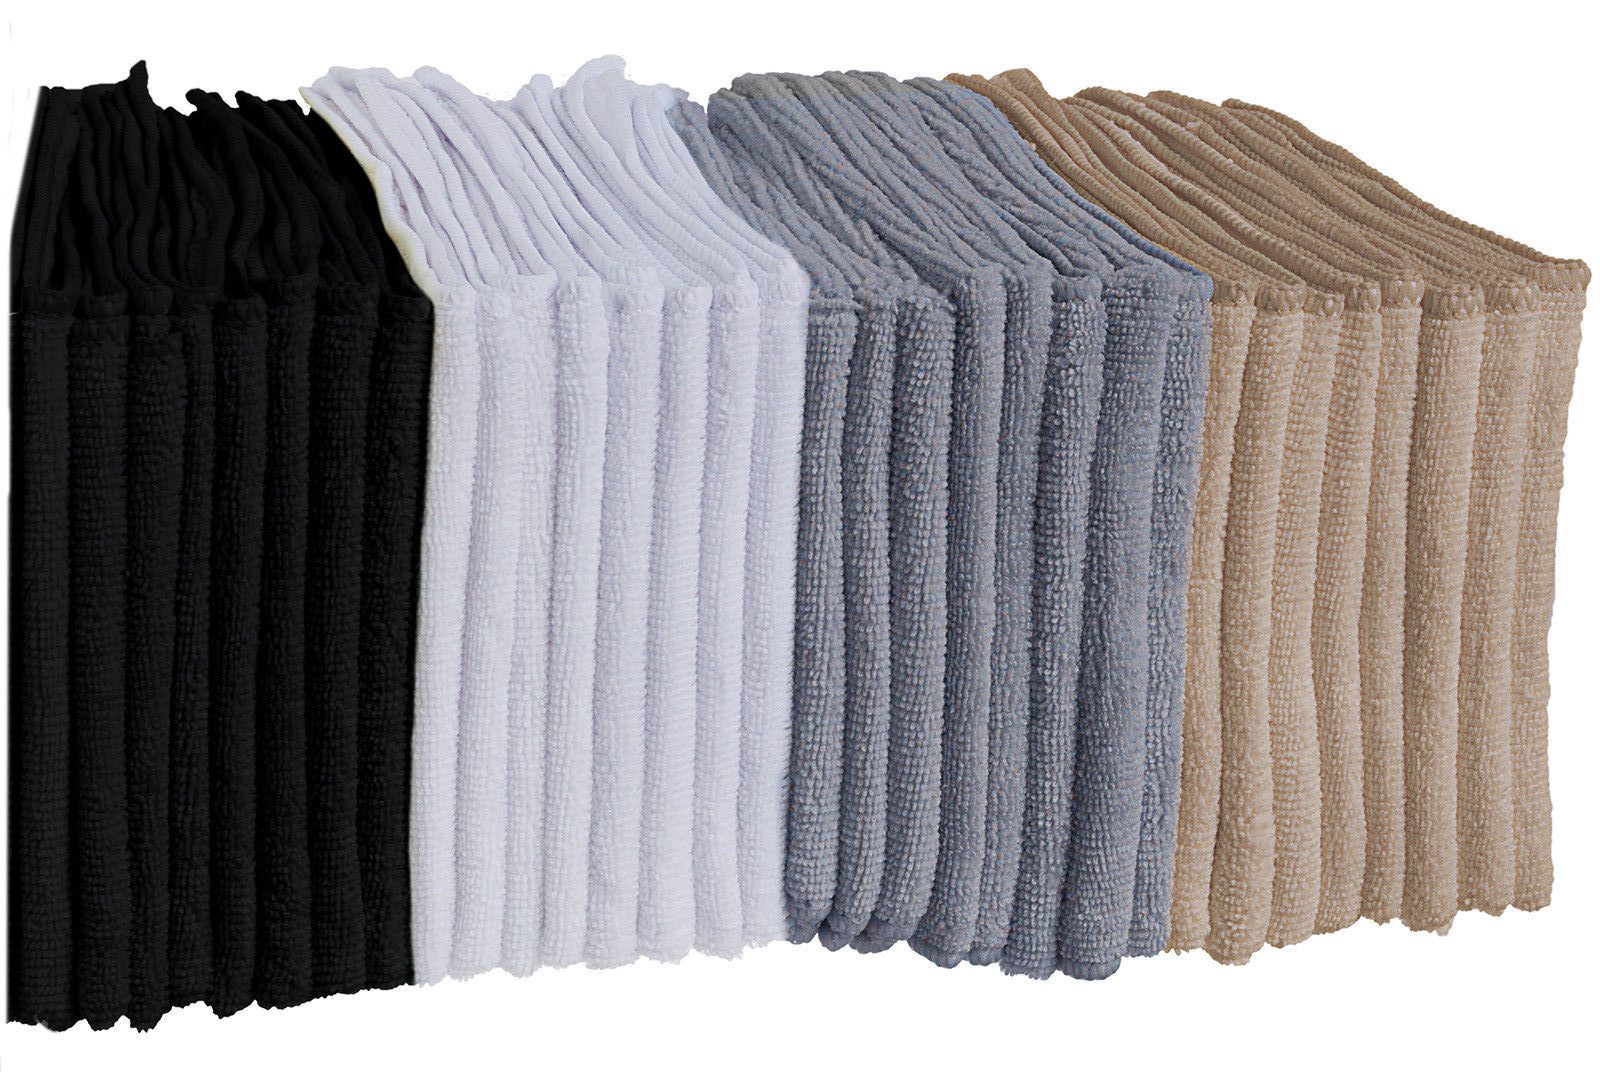 64 microfiber cleaning cloths for $17